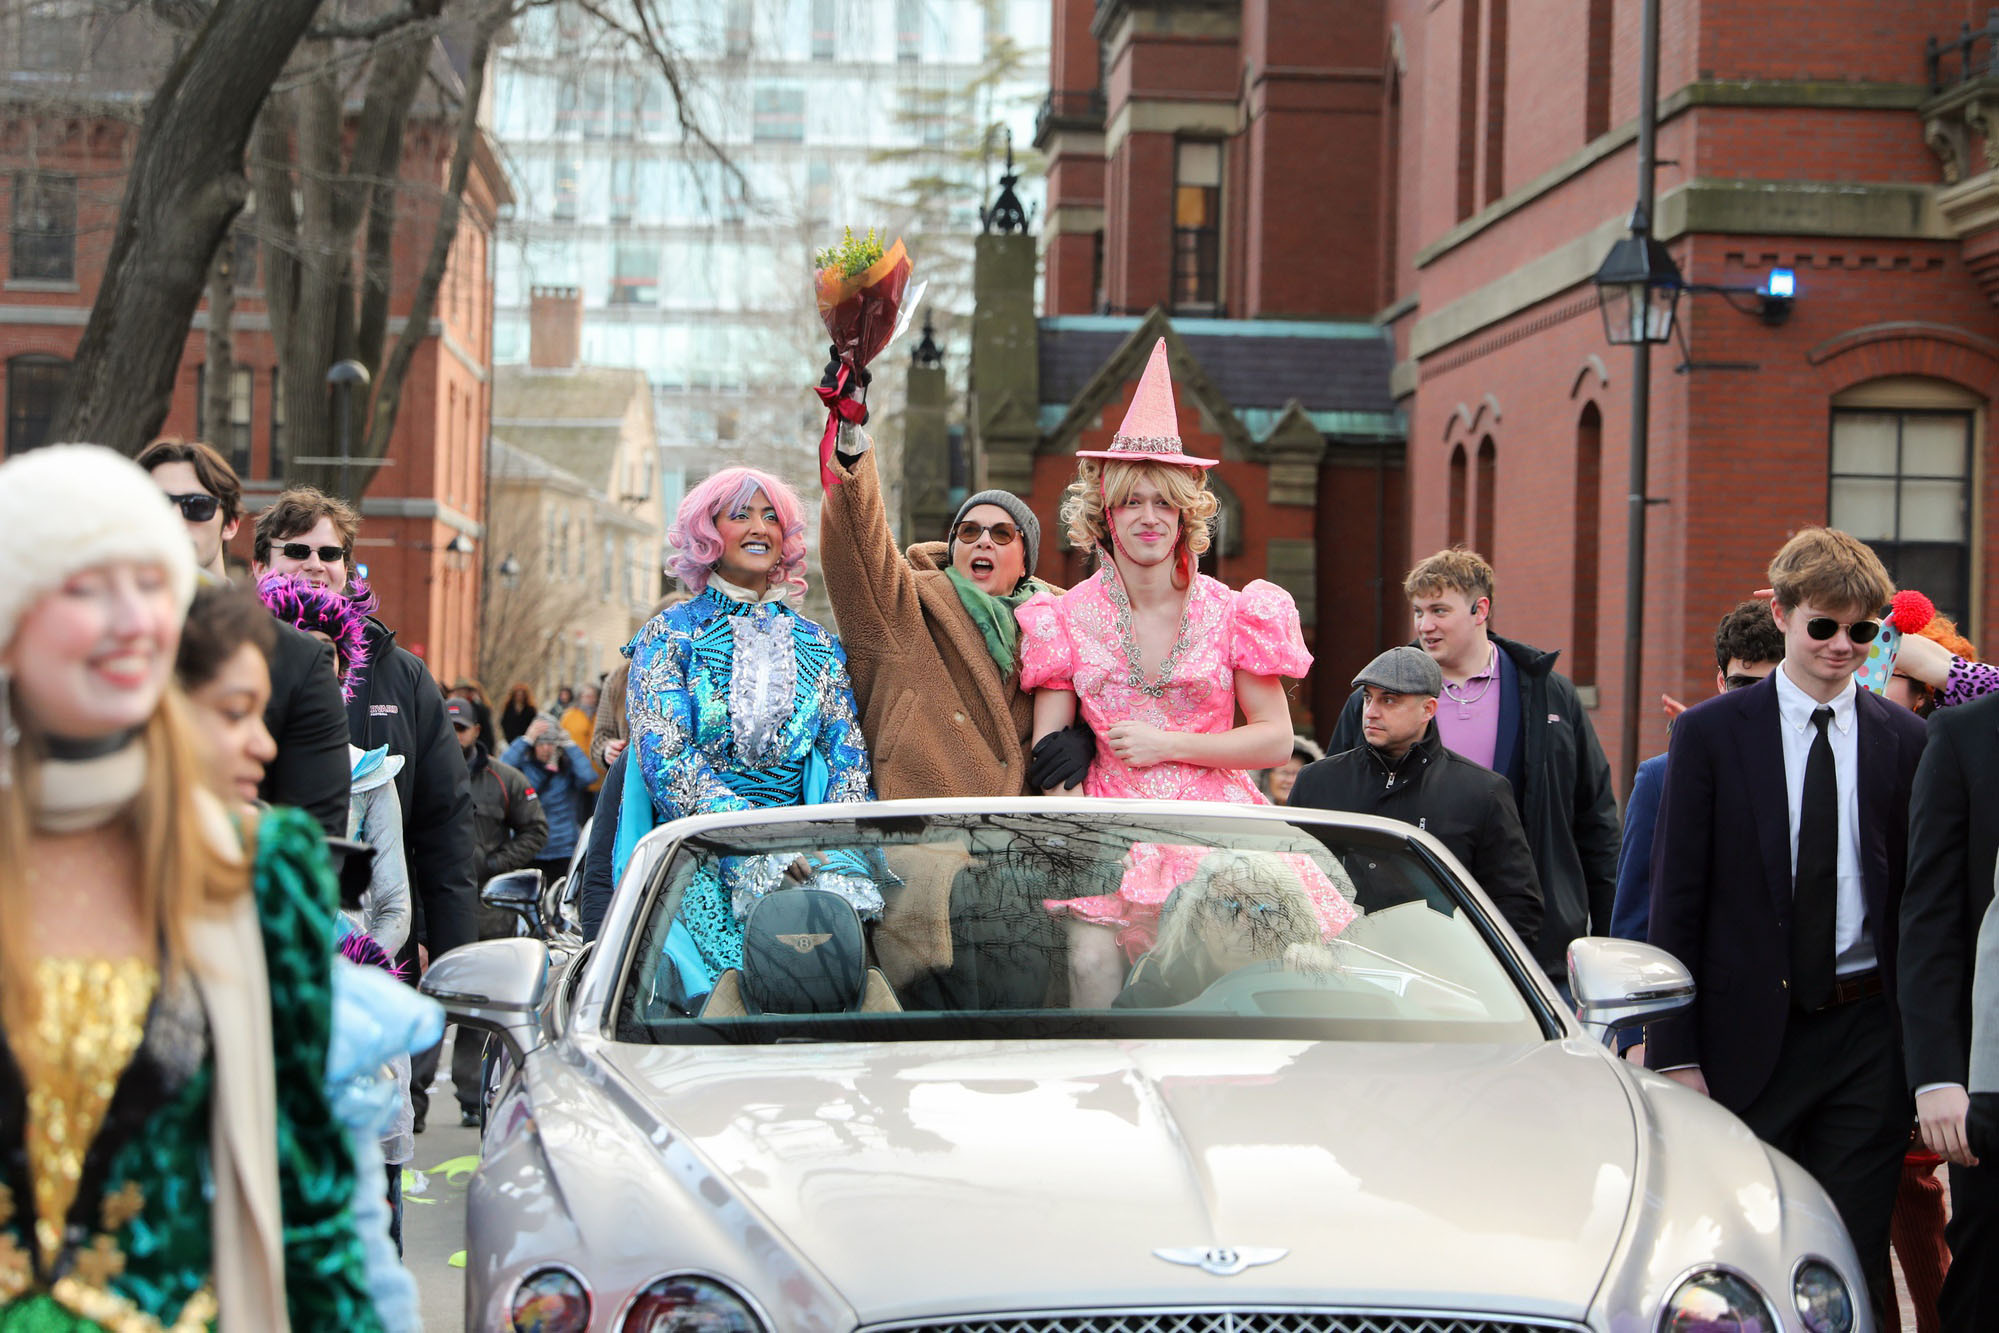 Actress Annette Bening was honored as the Hasty Pudding’s Woman of the Year. She was honored on with a parade through Harvard Yard, followed by a roast that evening.